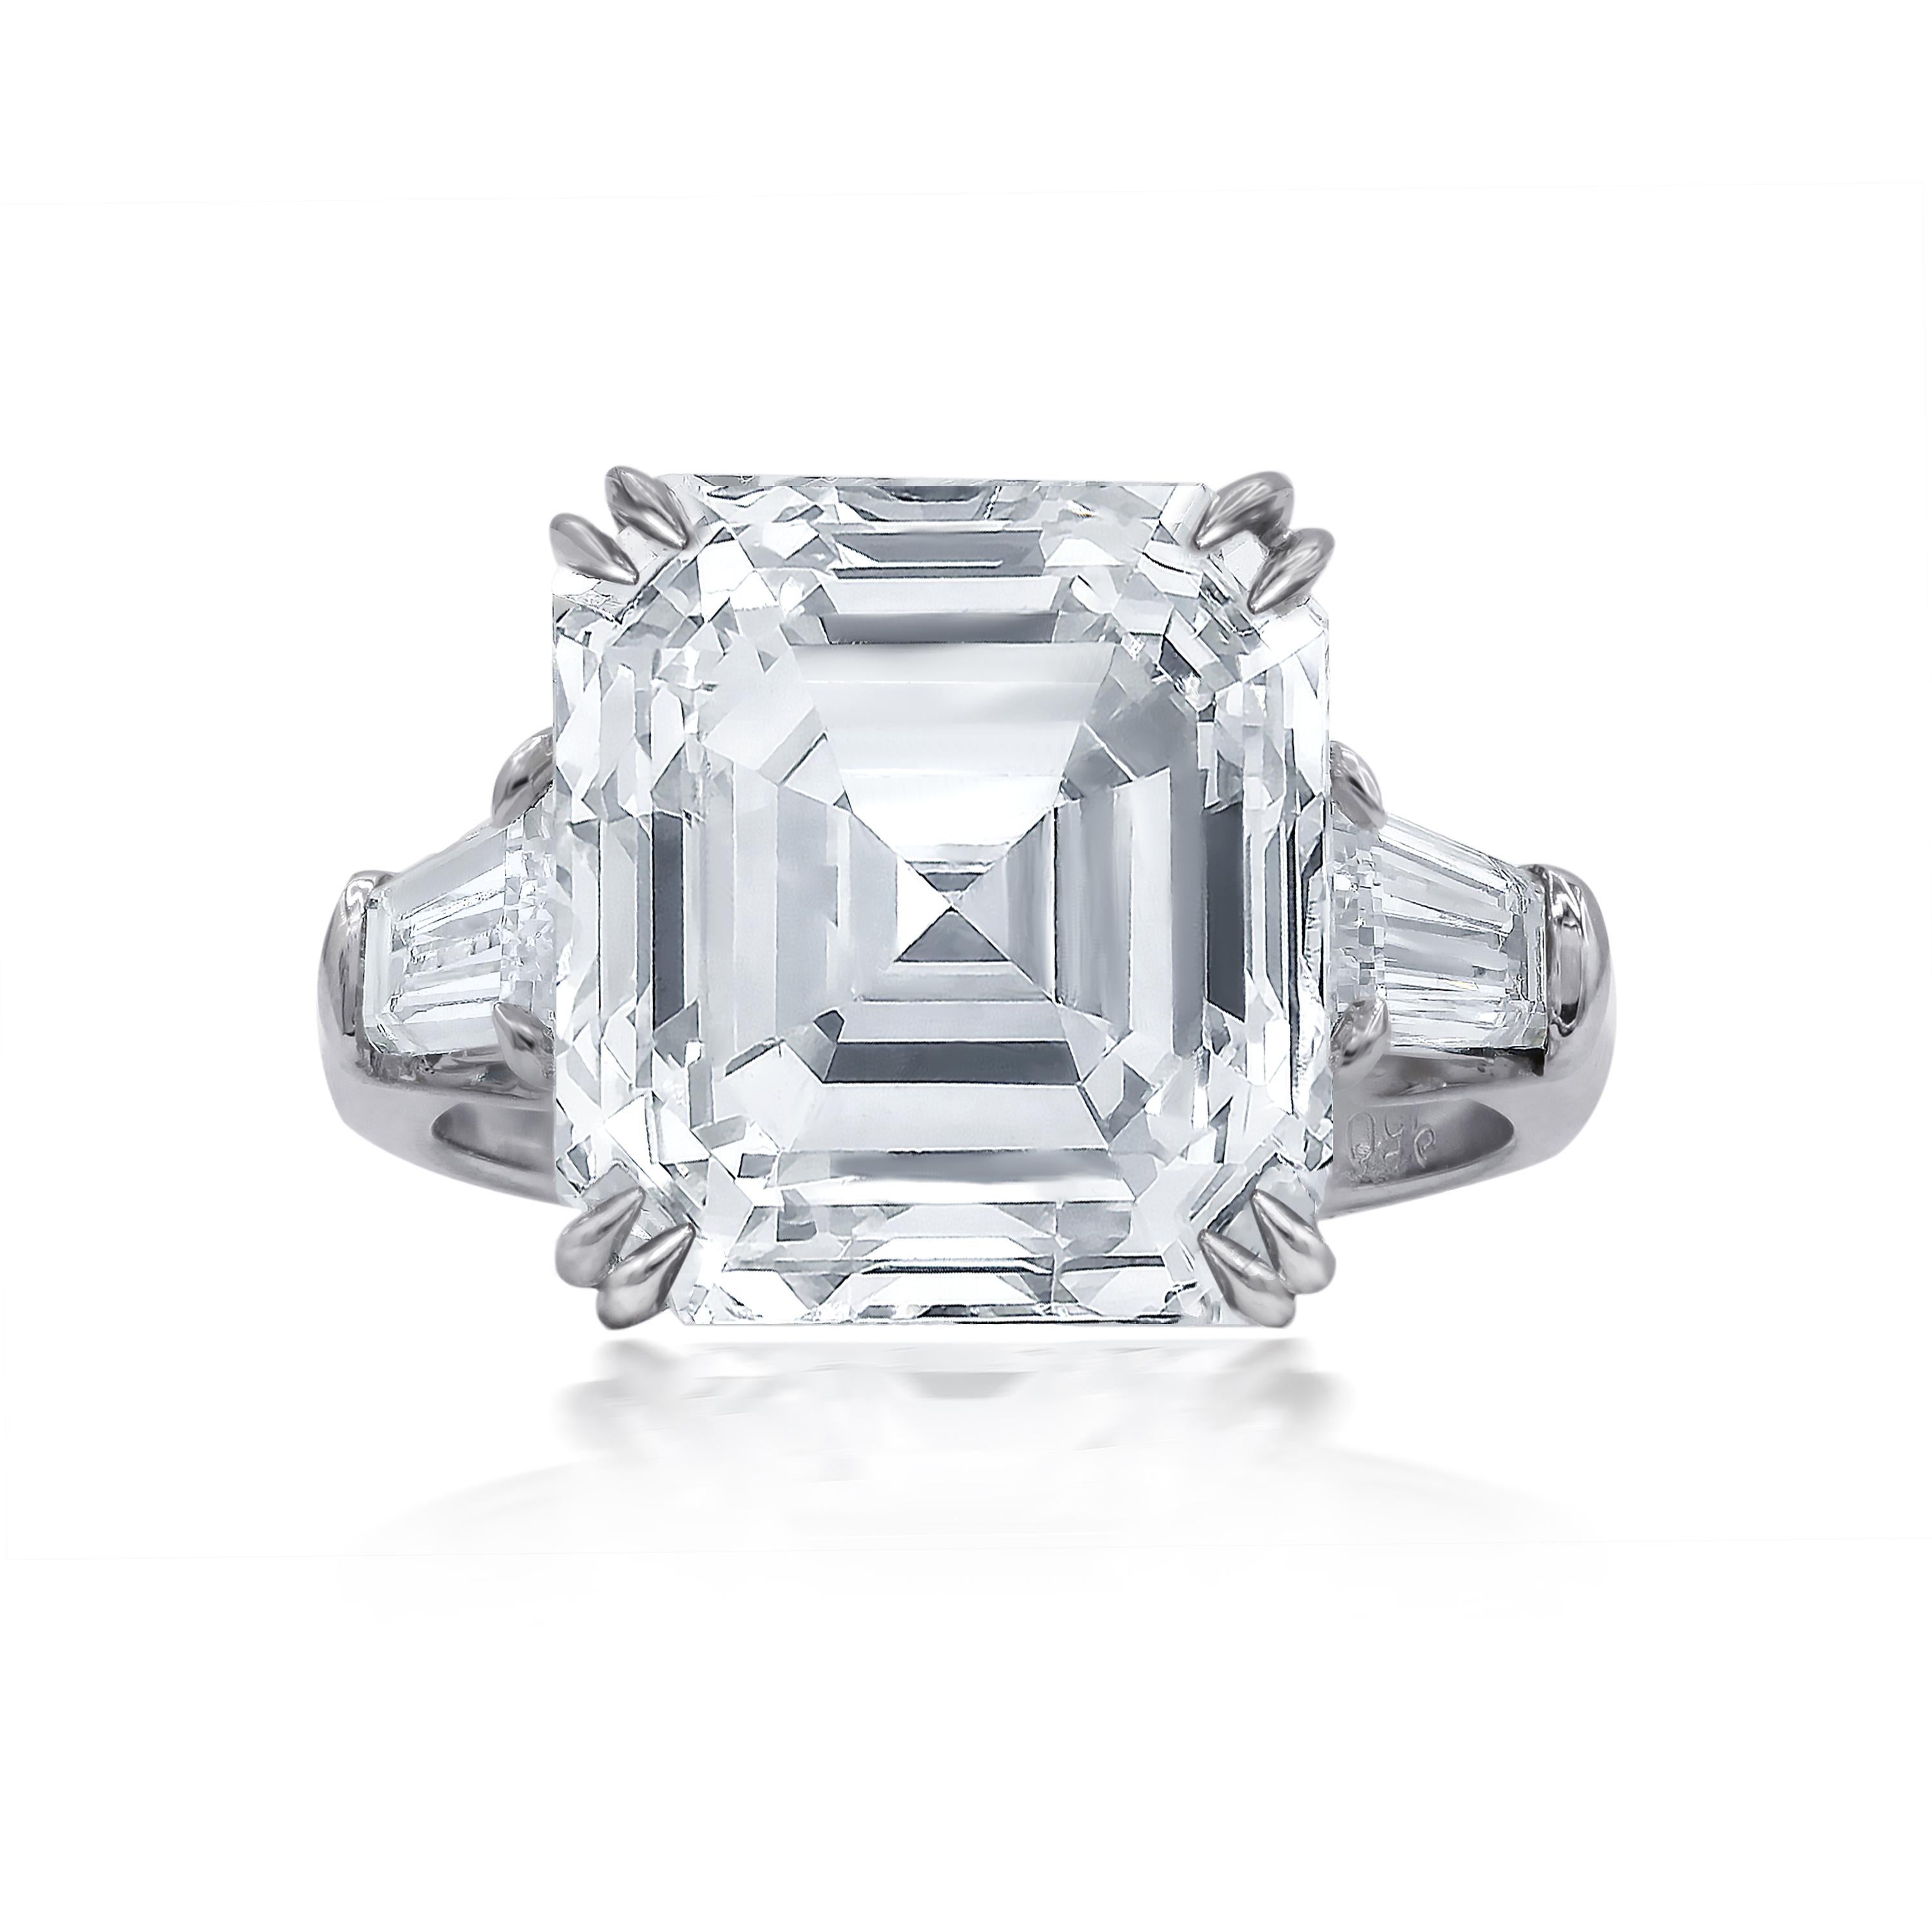 Platinum asscher cut diamond engagement ring with center asscher diamond 9.20ct j-vs2 (emc491) set in platinum with two tapered baguettes weighing 1.09cts
